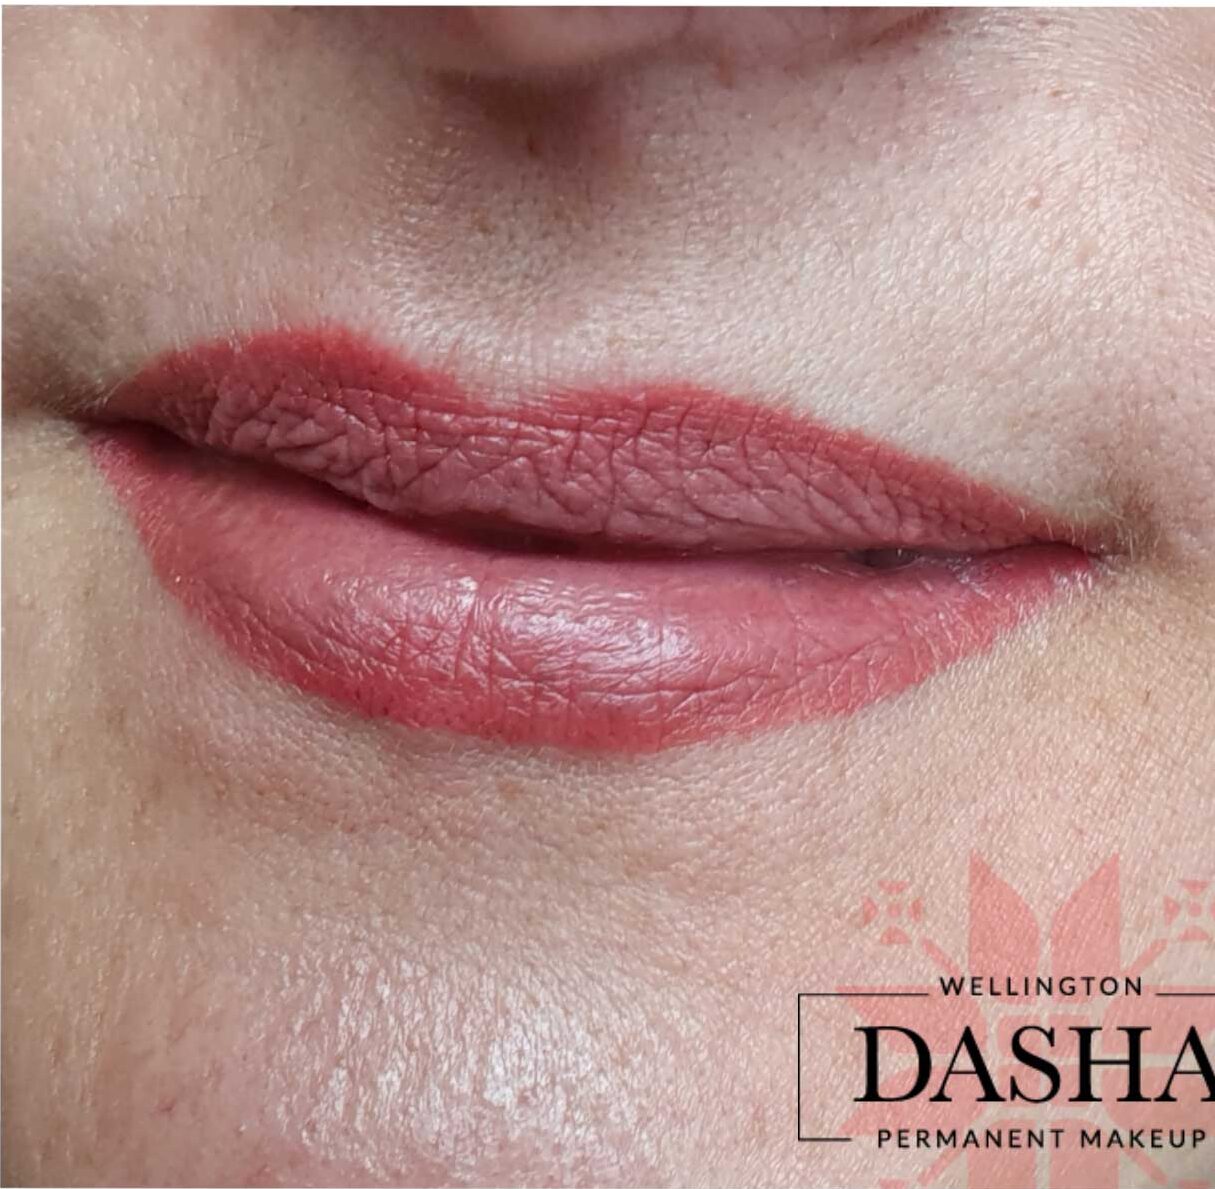 Lipstick Cosmetic Tattoo. Cosmetic and Mediical Tattoo by Dasha. Permanent makeup and reconstructive tattoo, scalp micro-pigmentation in Christchurch, New Zealand